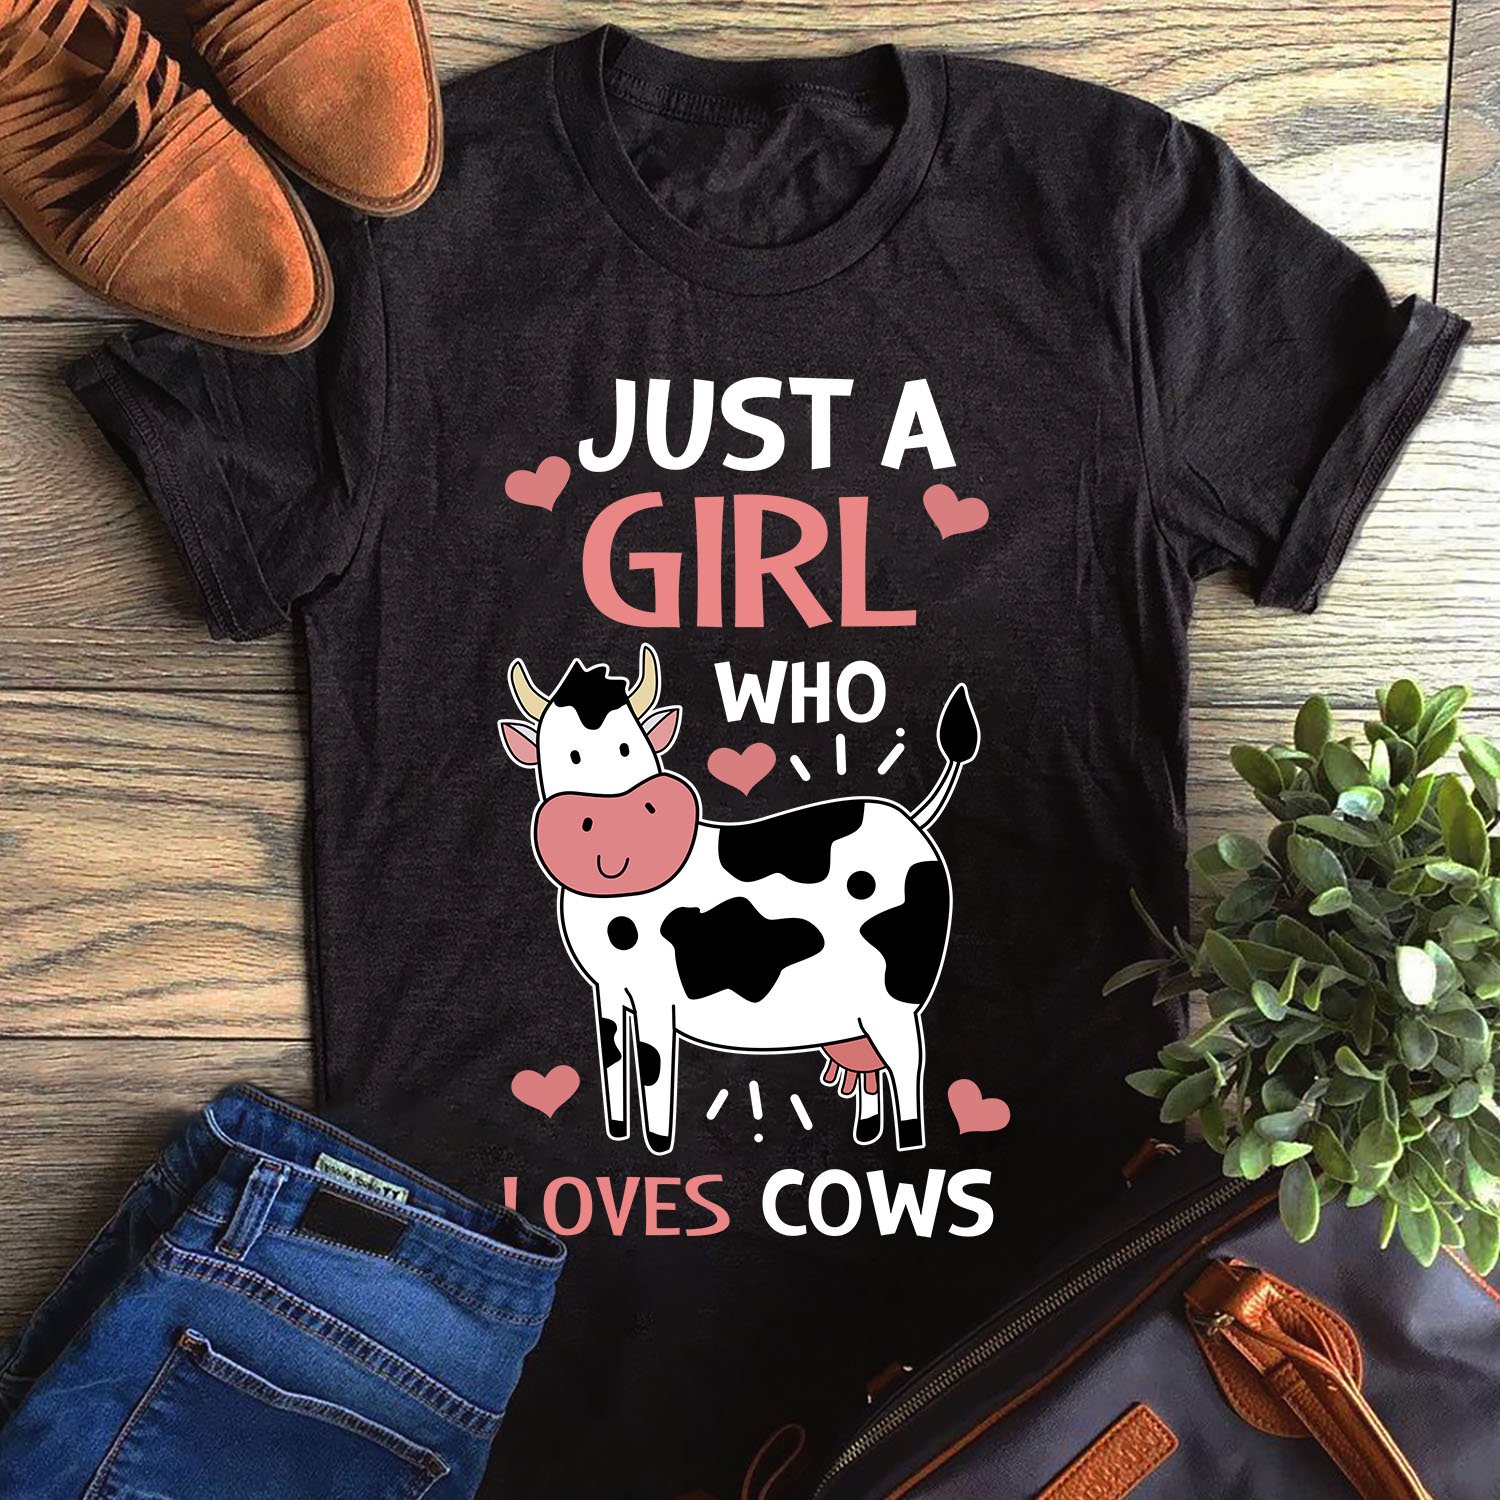 Just A Girl Who Loves Cows Farm Lover Graphic Unisex T Shirt, Sweatshirt, Hoodie Size S – 5XL